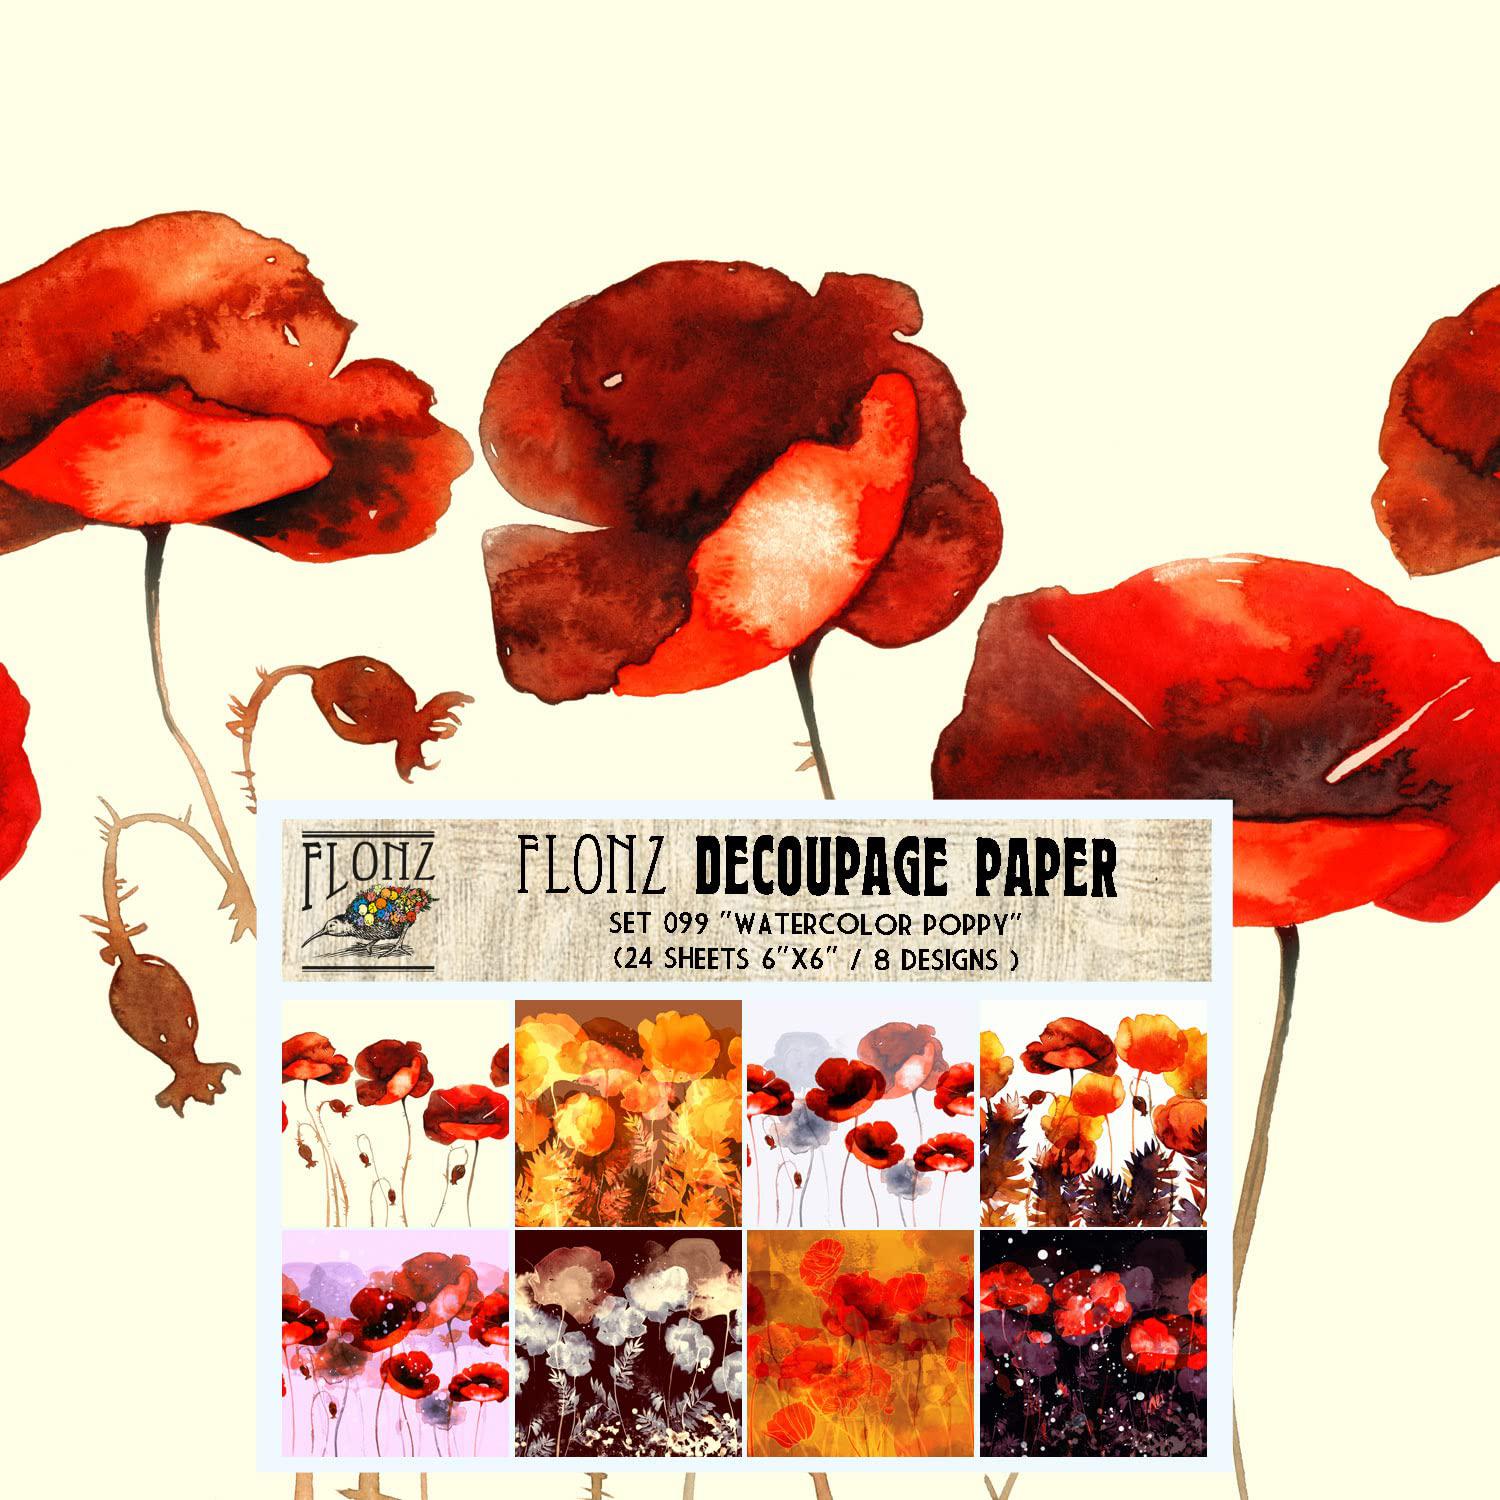 Flonz decoupage paper pack (24 sheets 6"x6") watercolor poppy # vintage styled seamless pattern paper for decoupage, craft and scra